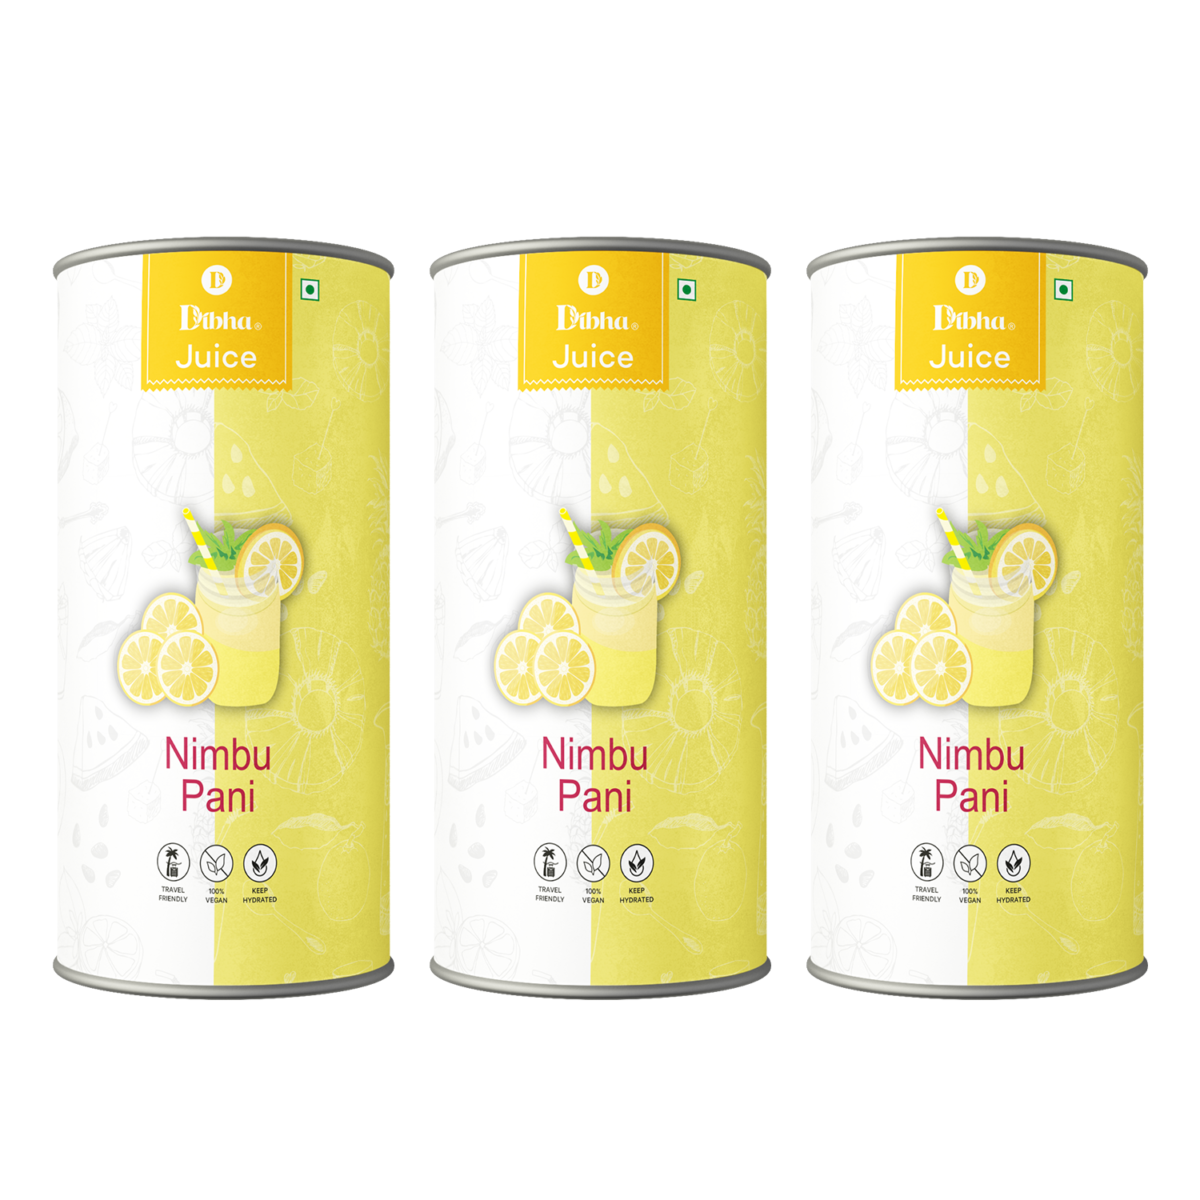 Honest Snacking Instant Juices Drink Premix Cups (Pack Of 3) Nimbu Pani 7 Cups Each Cup 5 gm Front-dibha